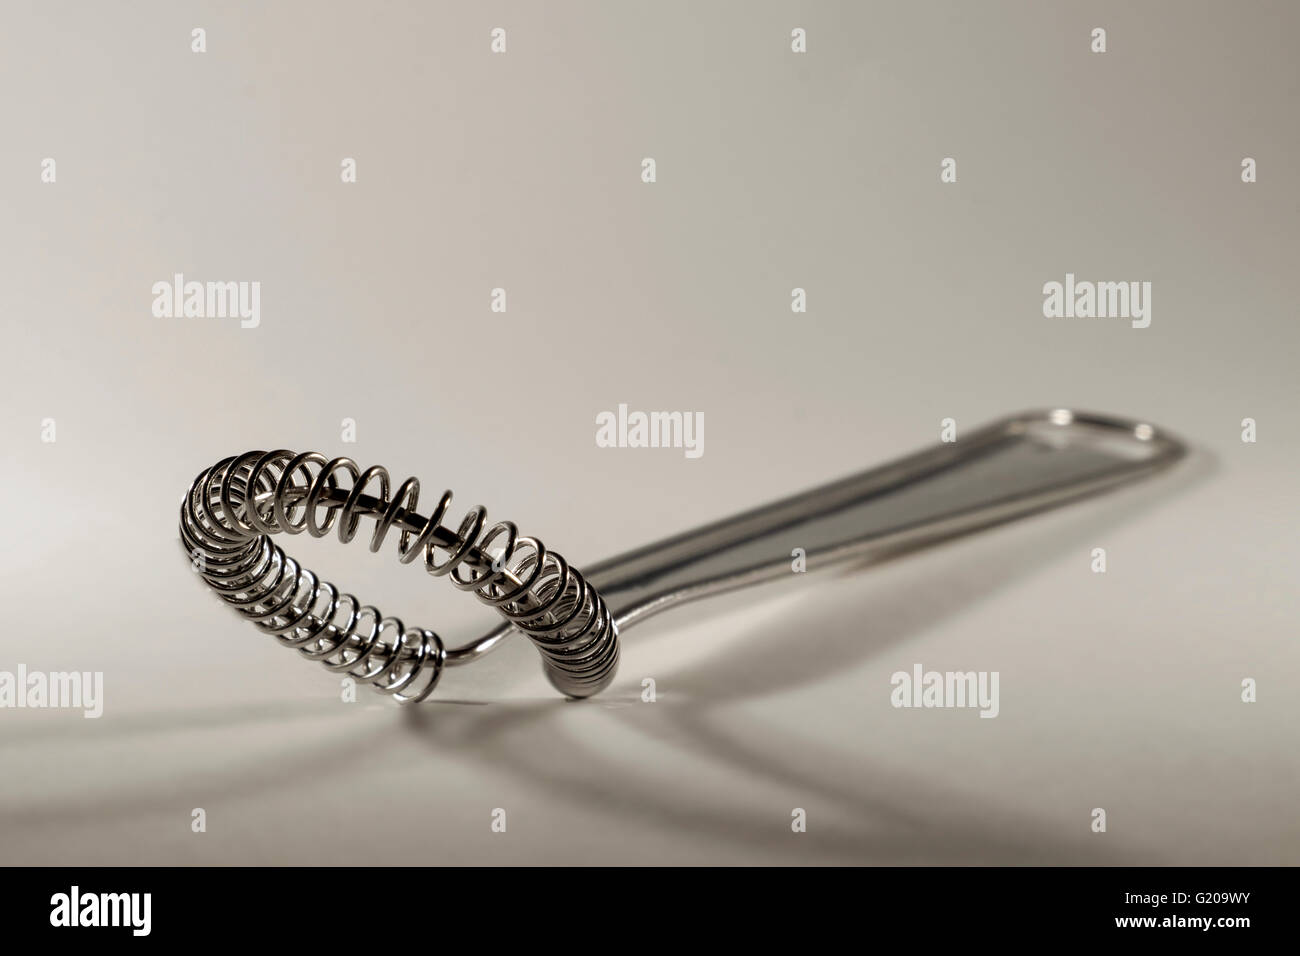 Stainless steel hand whisk isolated on white background with copy space Stock Photo